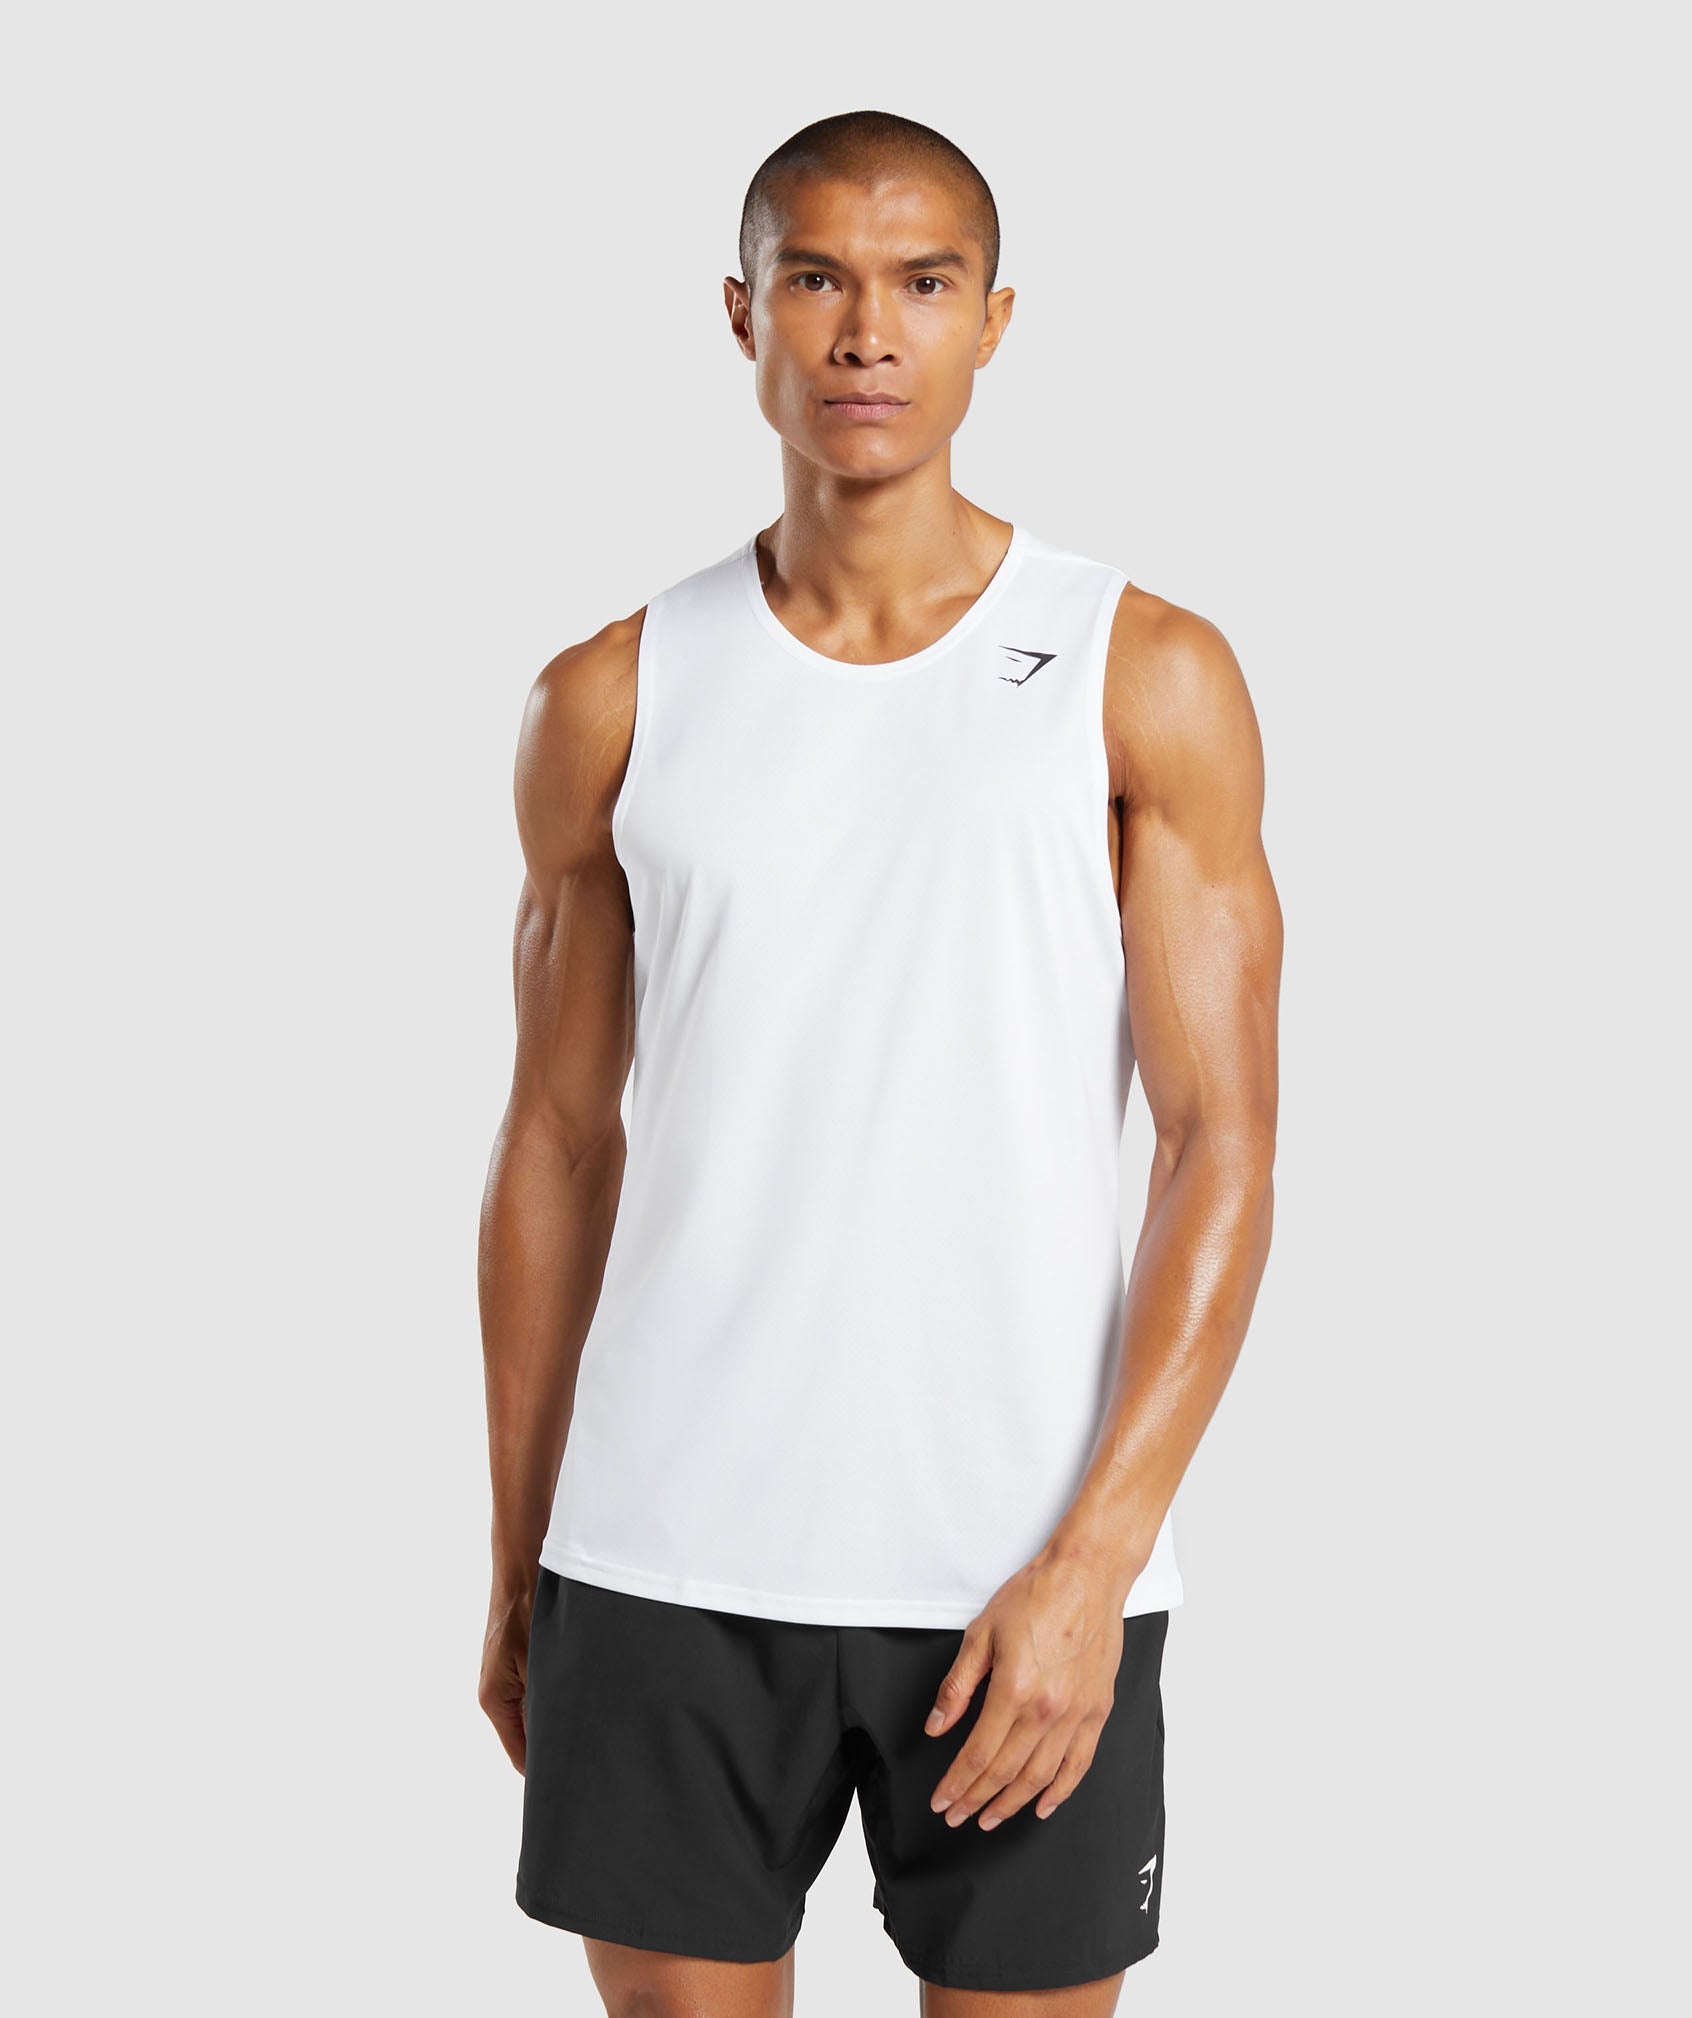 Arrival Tank in White is out of stock